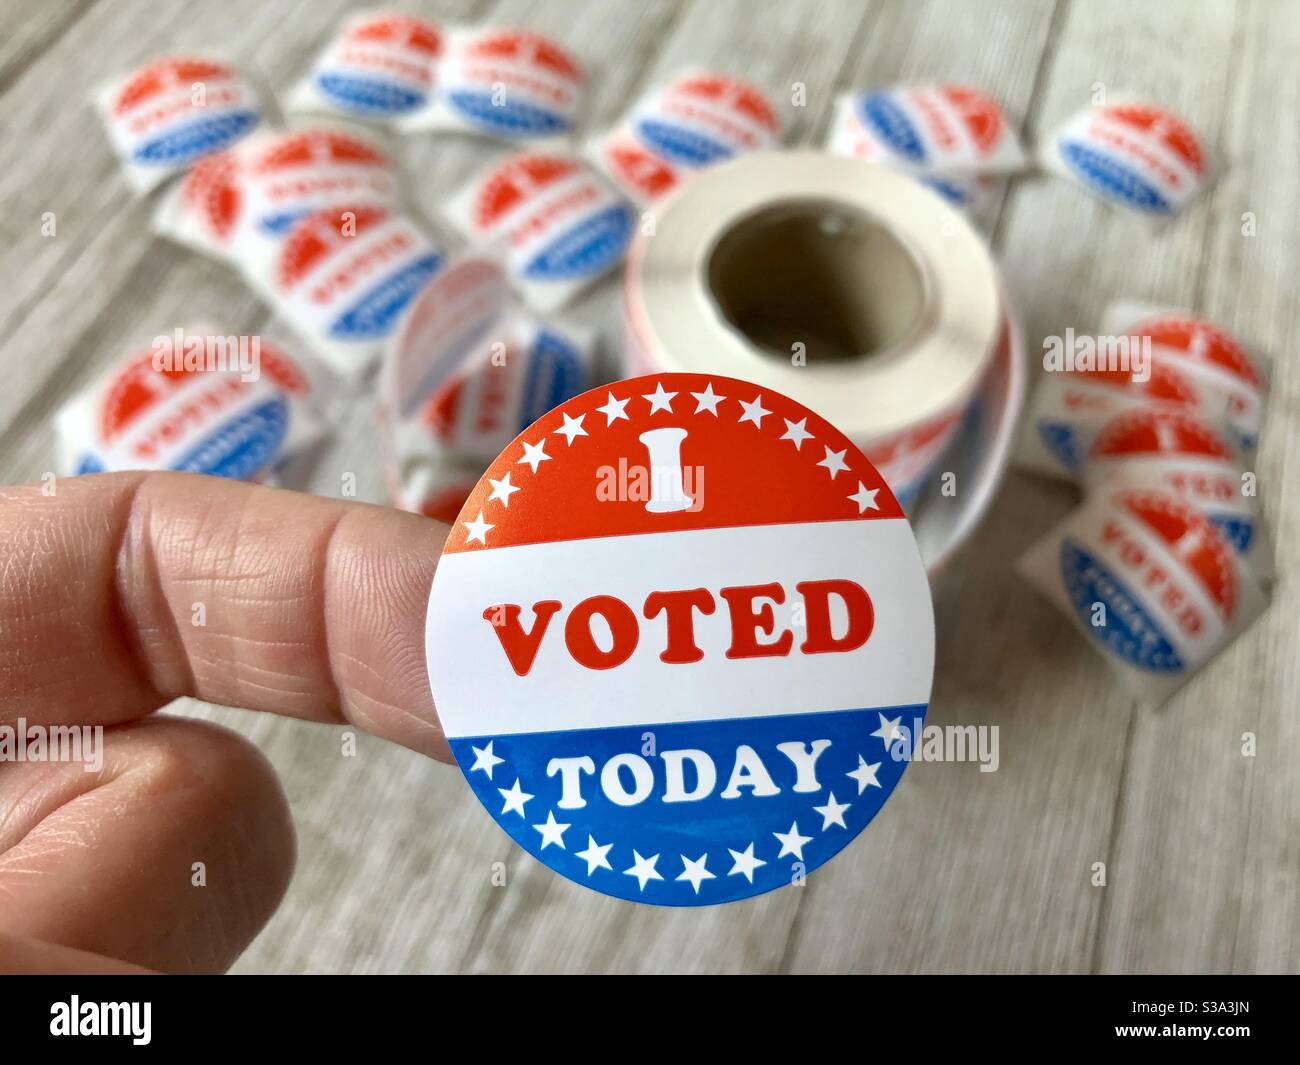 I voted sticker on a woman’s finger Stock Photo